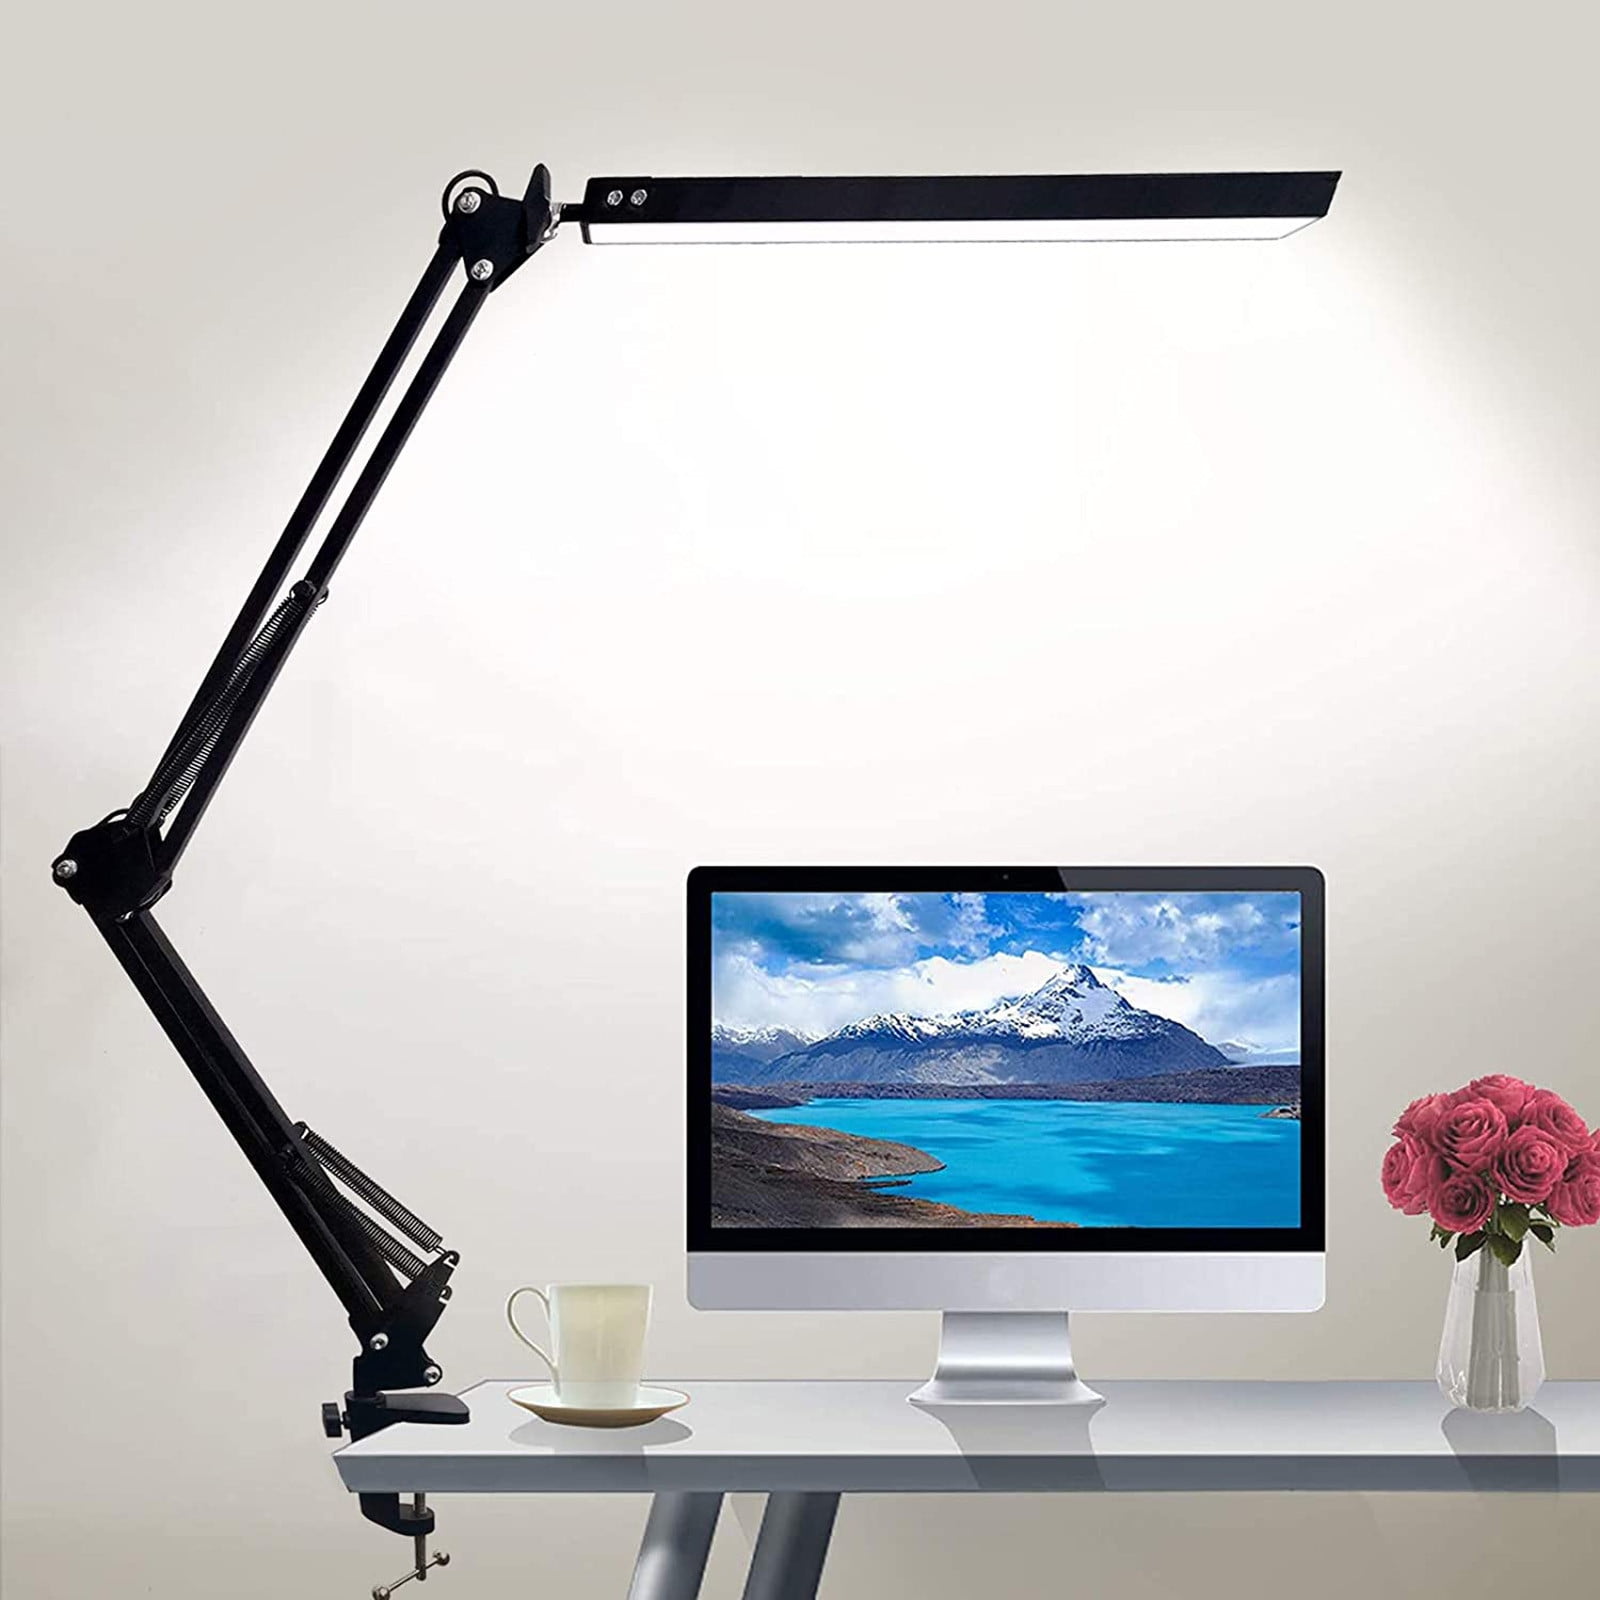 Craft Studio Brightness Upgrade and Memory Function Desk Light for Reading Office Workbench Black 3 Color Modes Eye-Caring Dimmable Architect Table Lamp Swing Arm Lamp with Clamp LED Desk Lamp